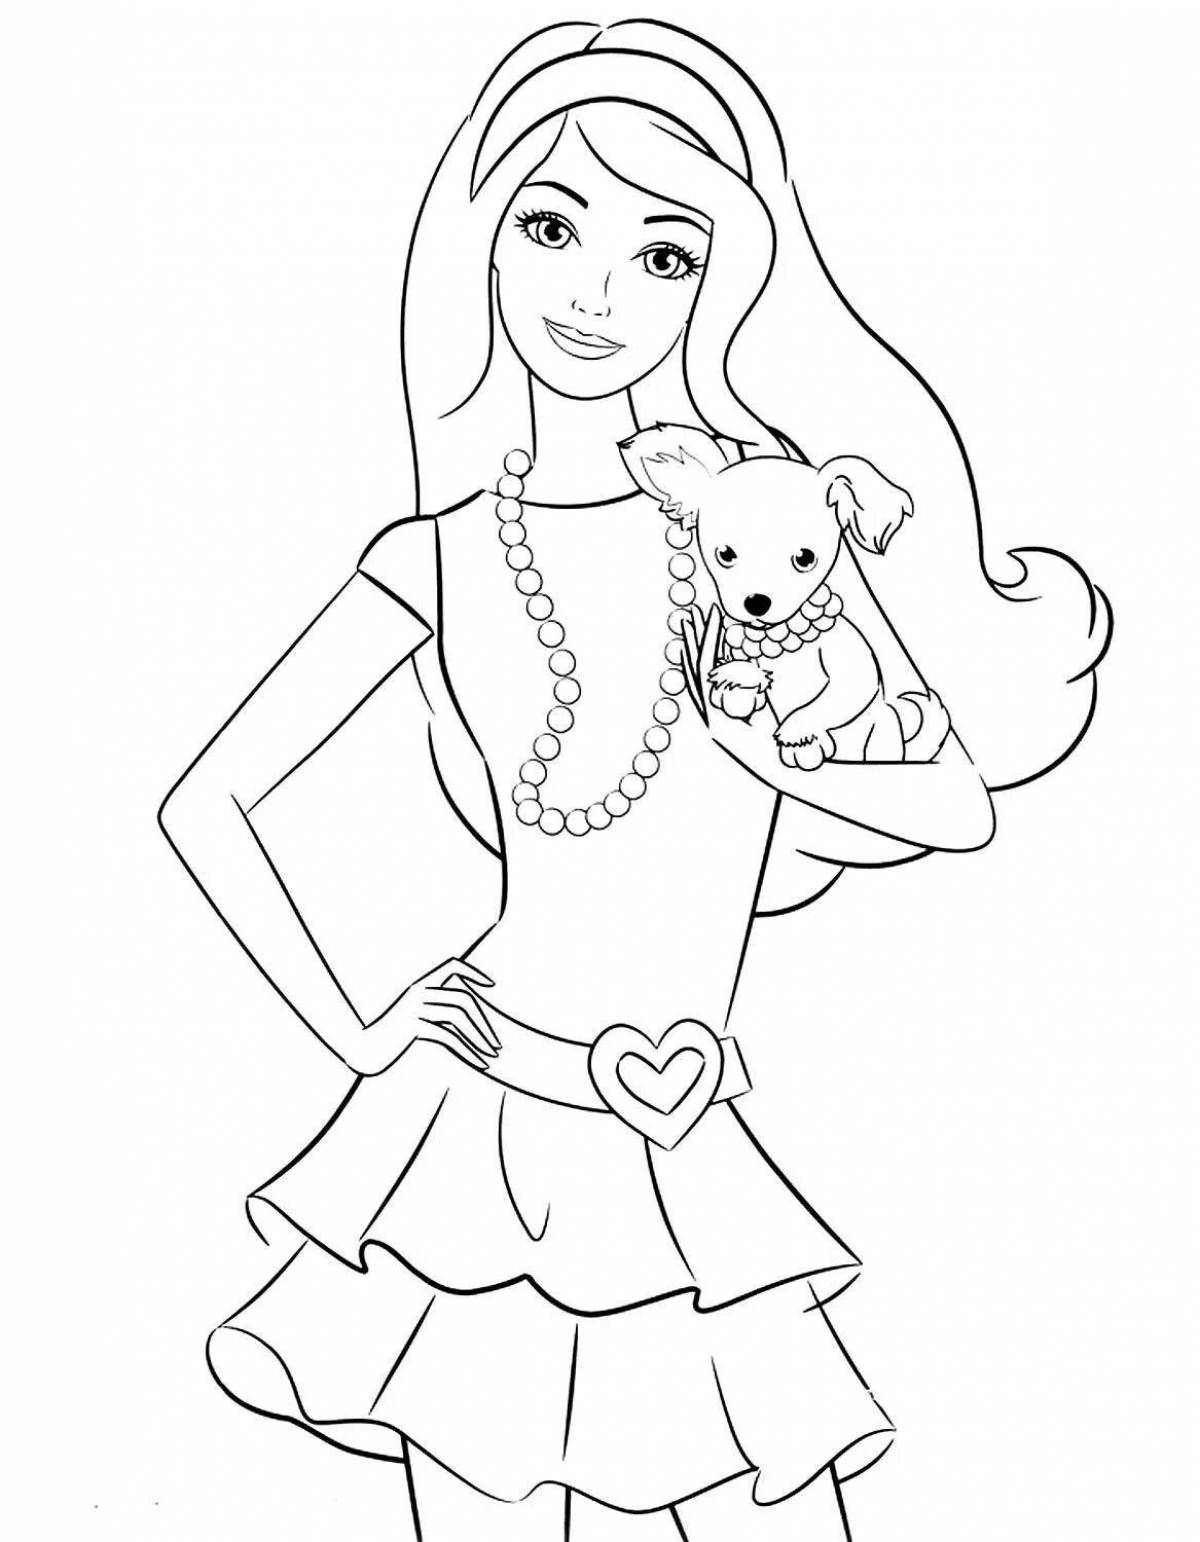 Barbie doll live coloring